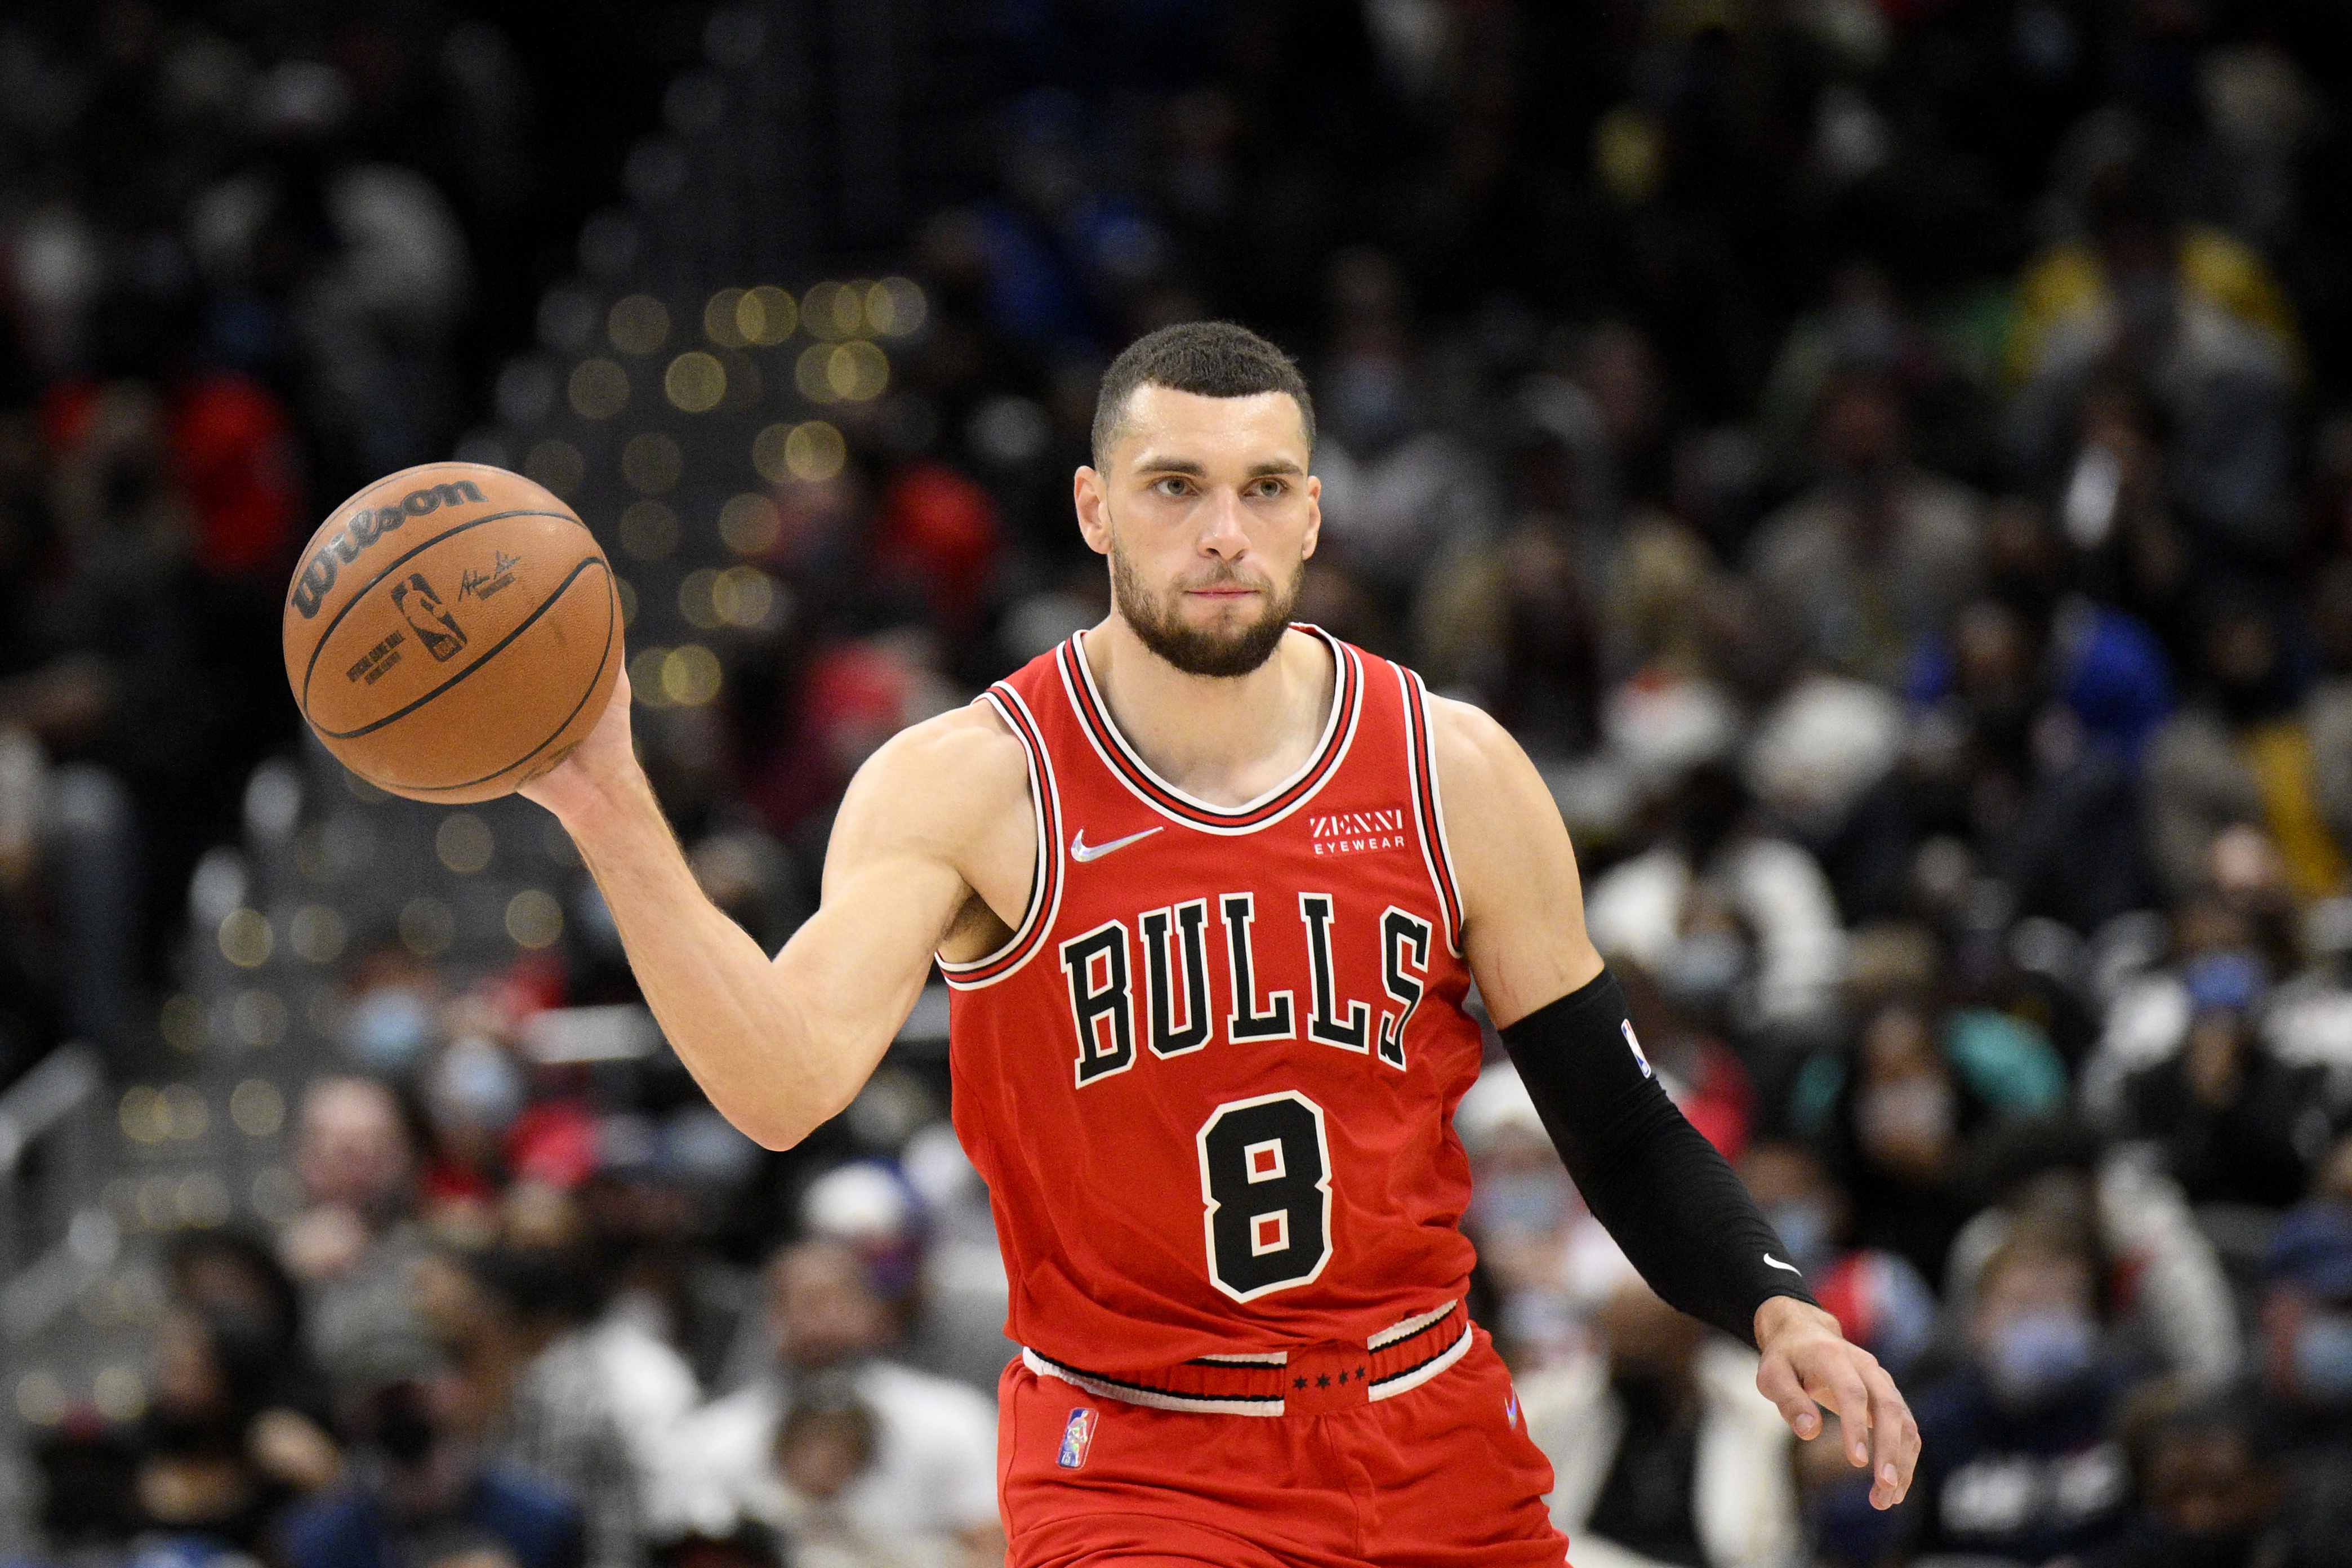 Bulls' Zach LaVine 'Not Expected to Miss Significant Time' After MRI on Knee Injury